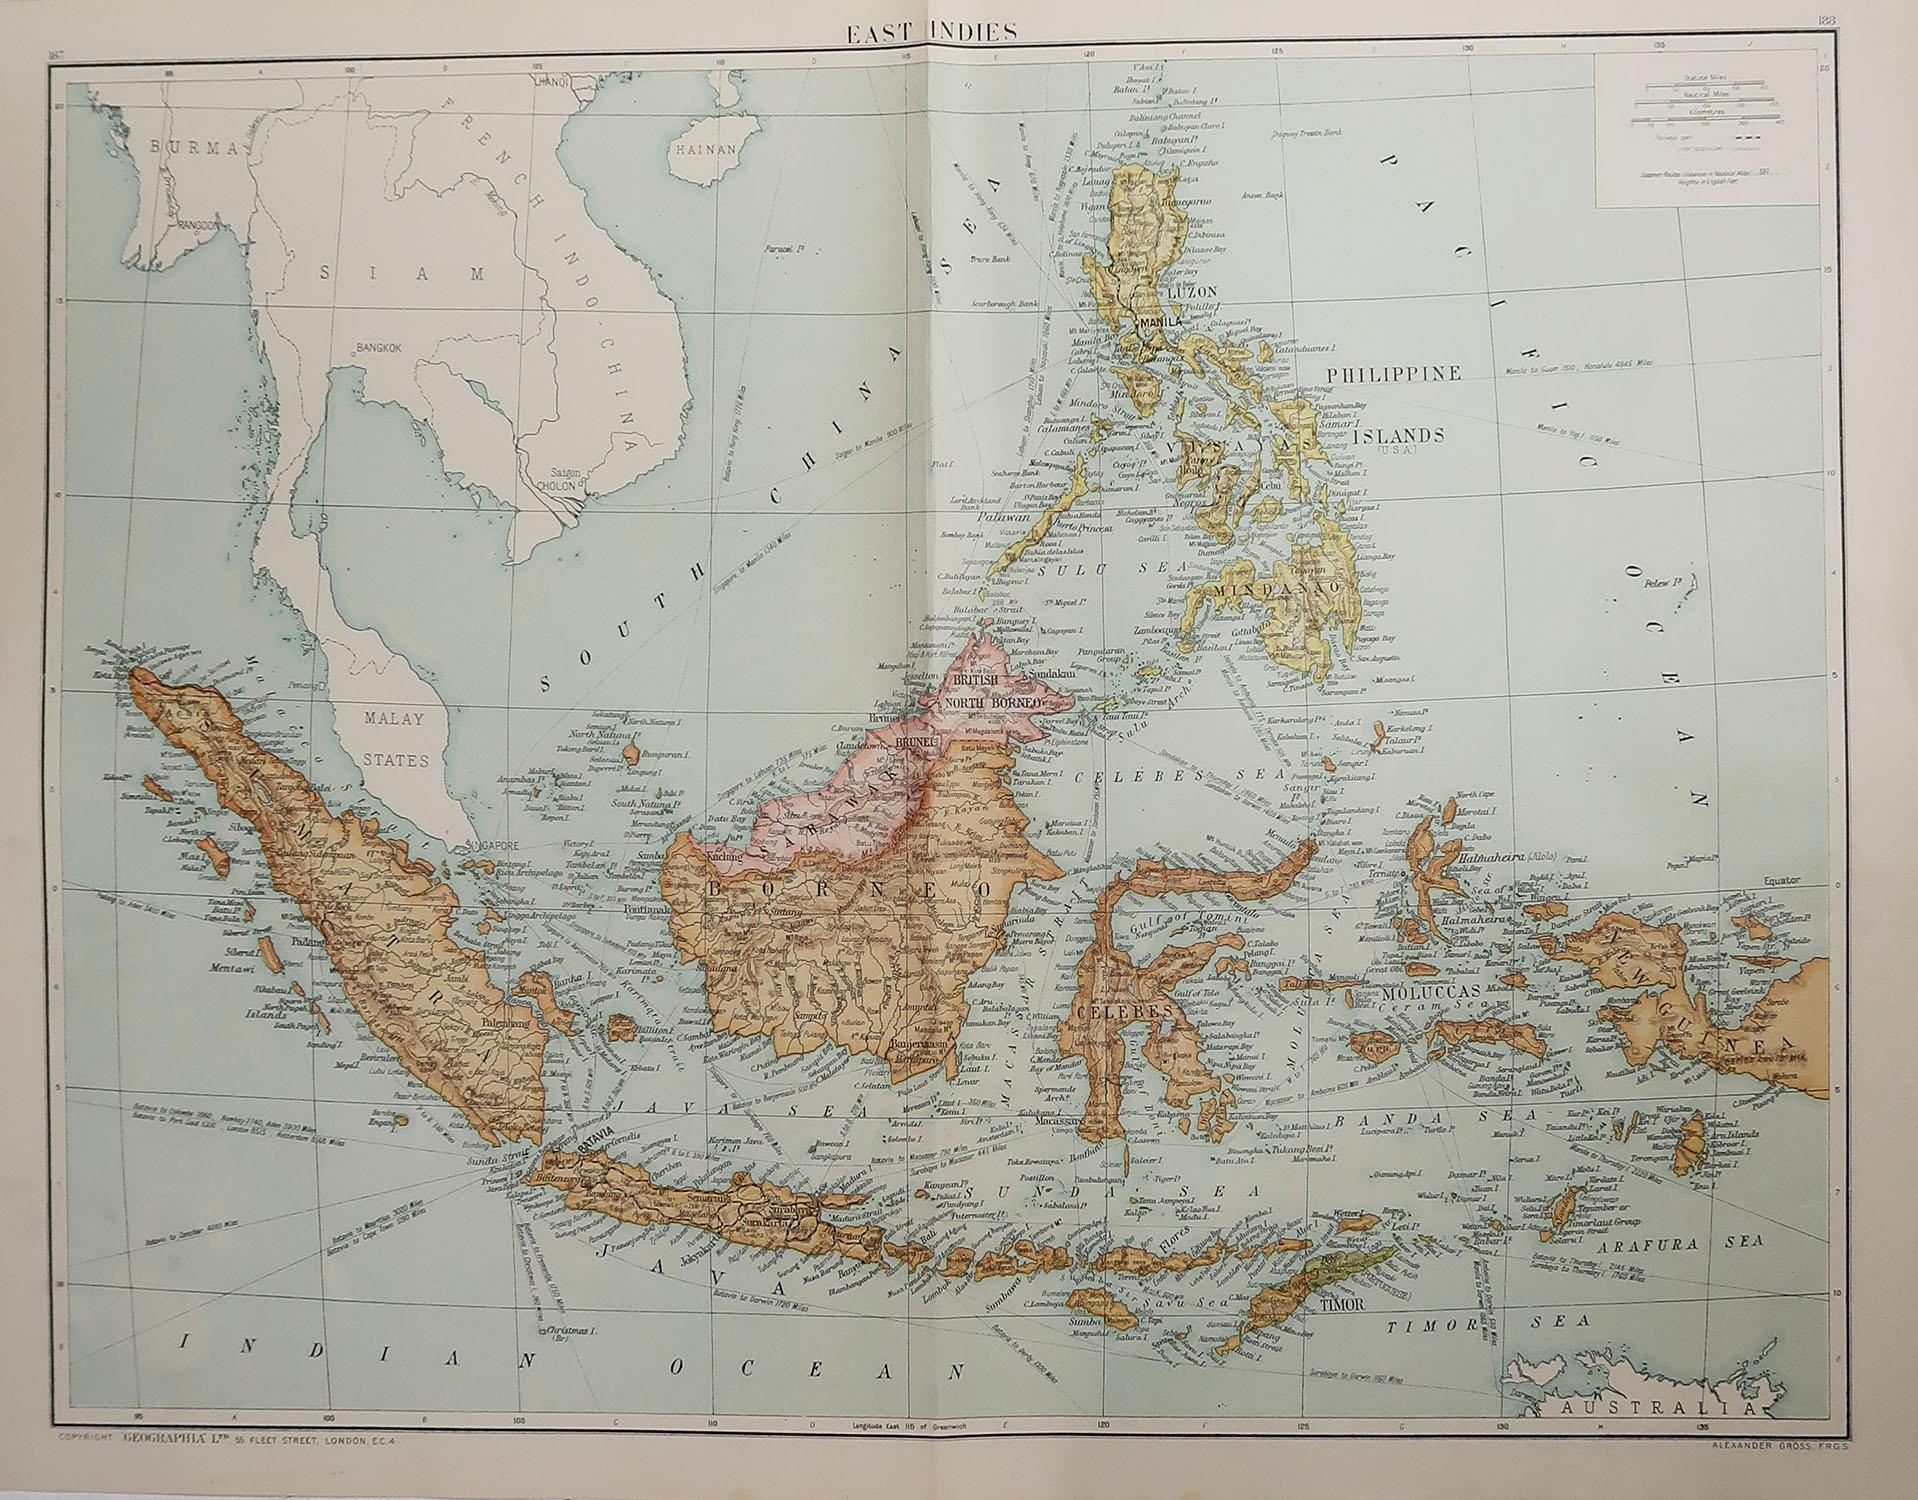 Great map of South East Asia

Original color. 

Good condition 

Published by Alexander Gross

Unframed.








 